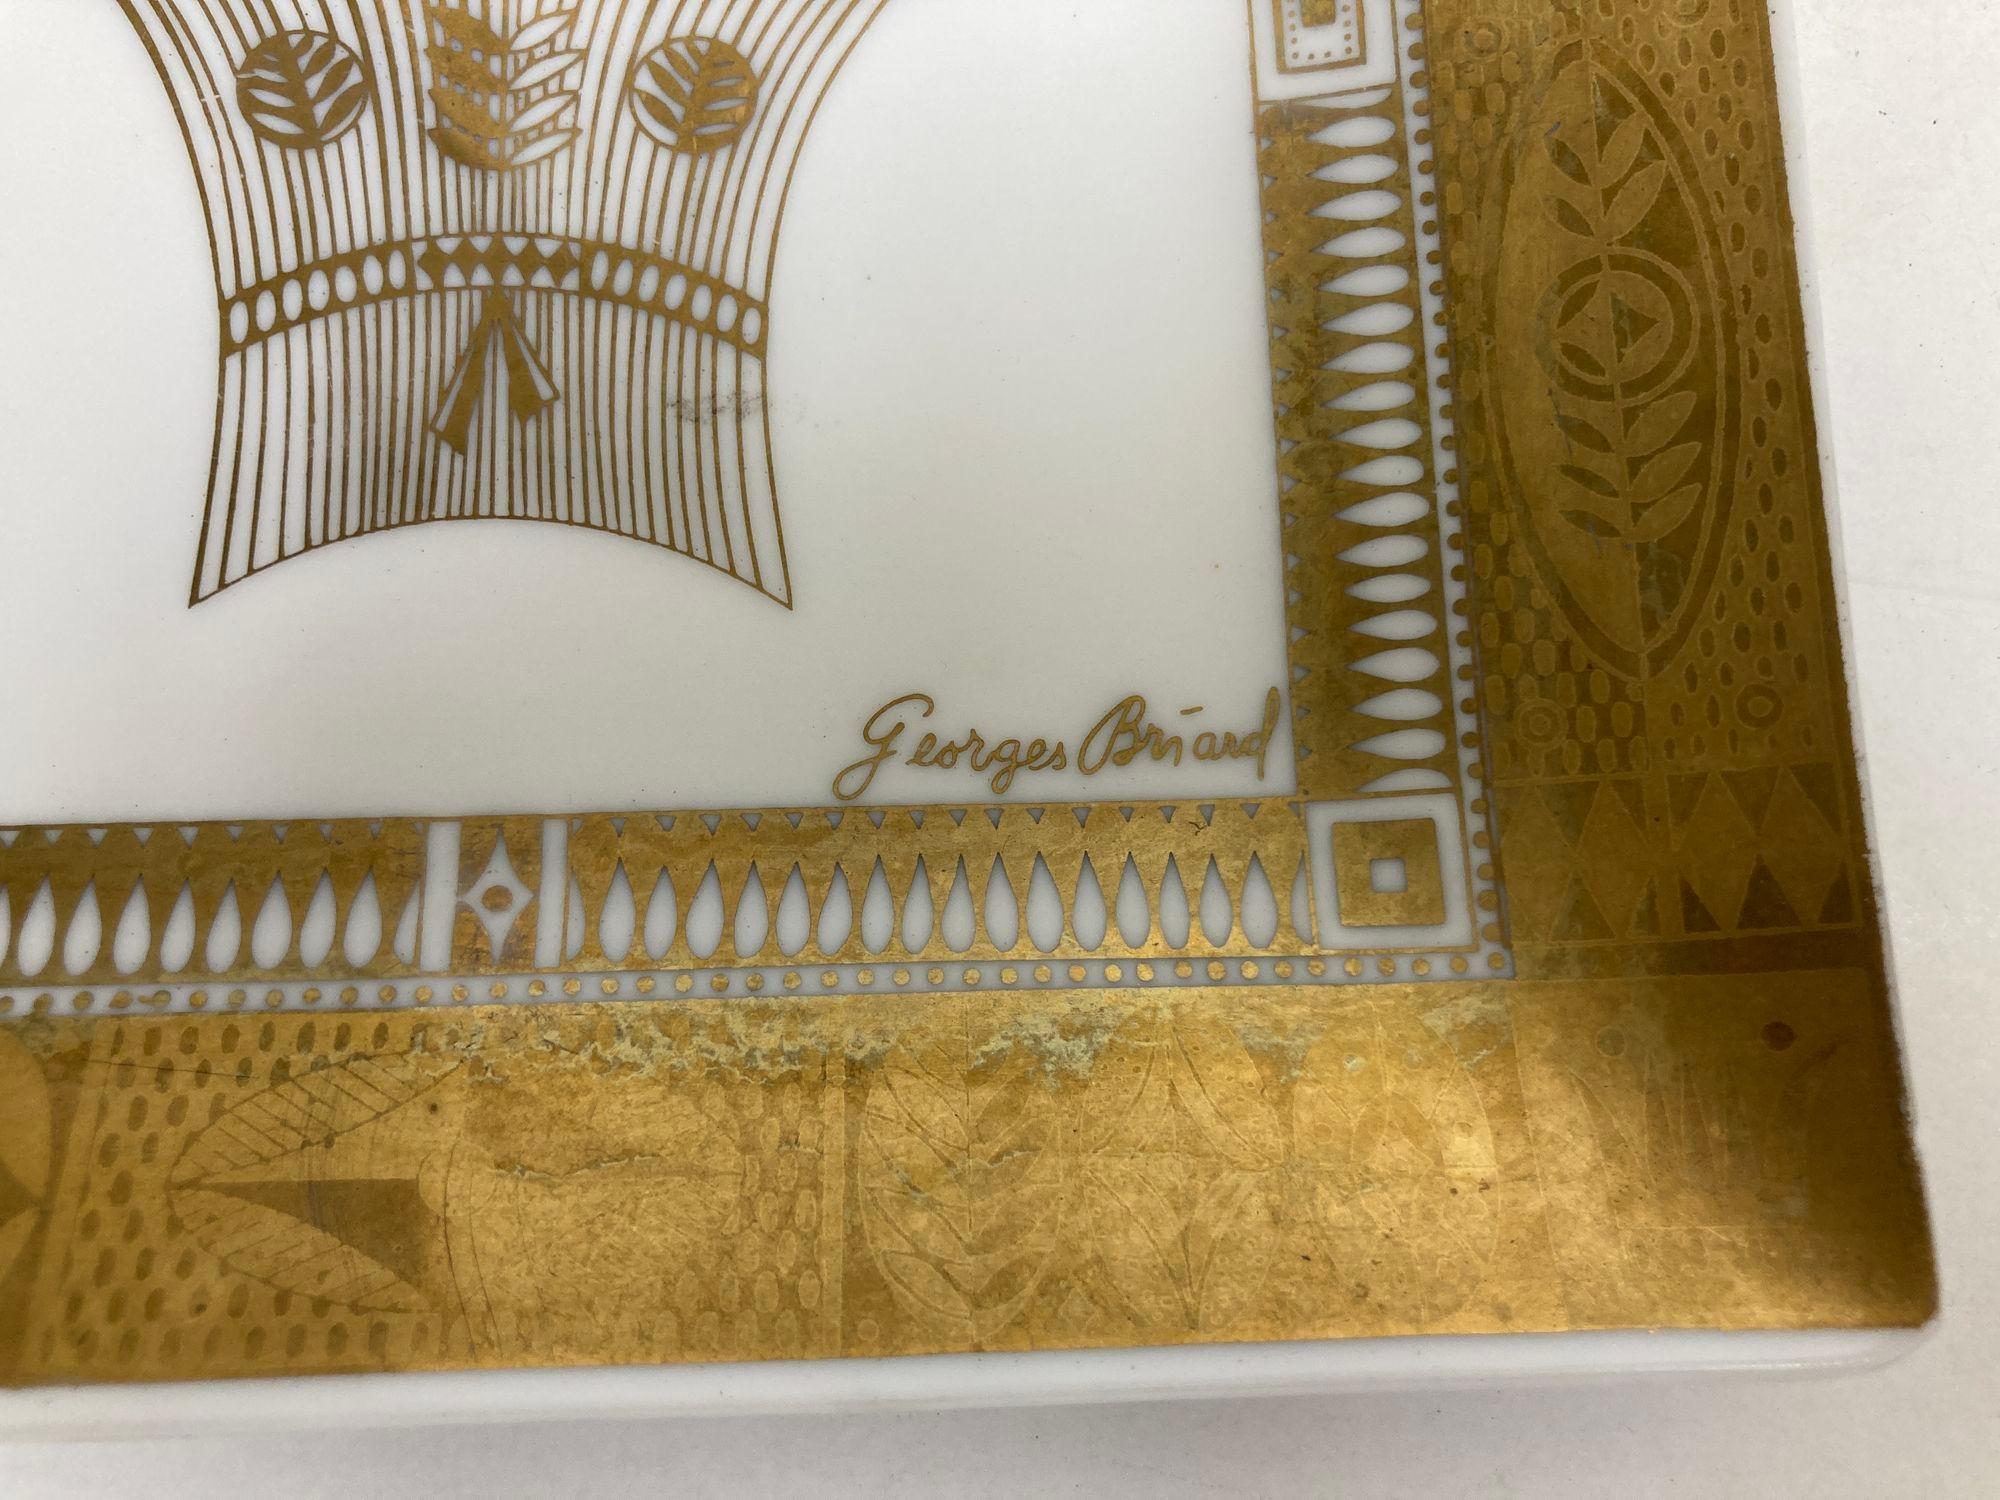 Art Deco Style Georges Briard Milk Glass Tray Dish with Golden Harvest Design.
Stunning mid century modern bent glass tray with 22k gold center harvest design accents.
Designed and signed by Georges Briard. Circa 1960s.
This stunning mid century